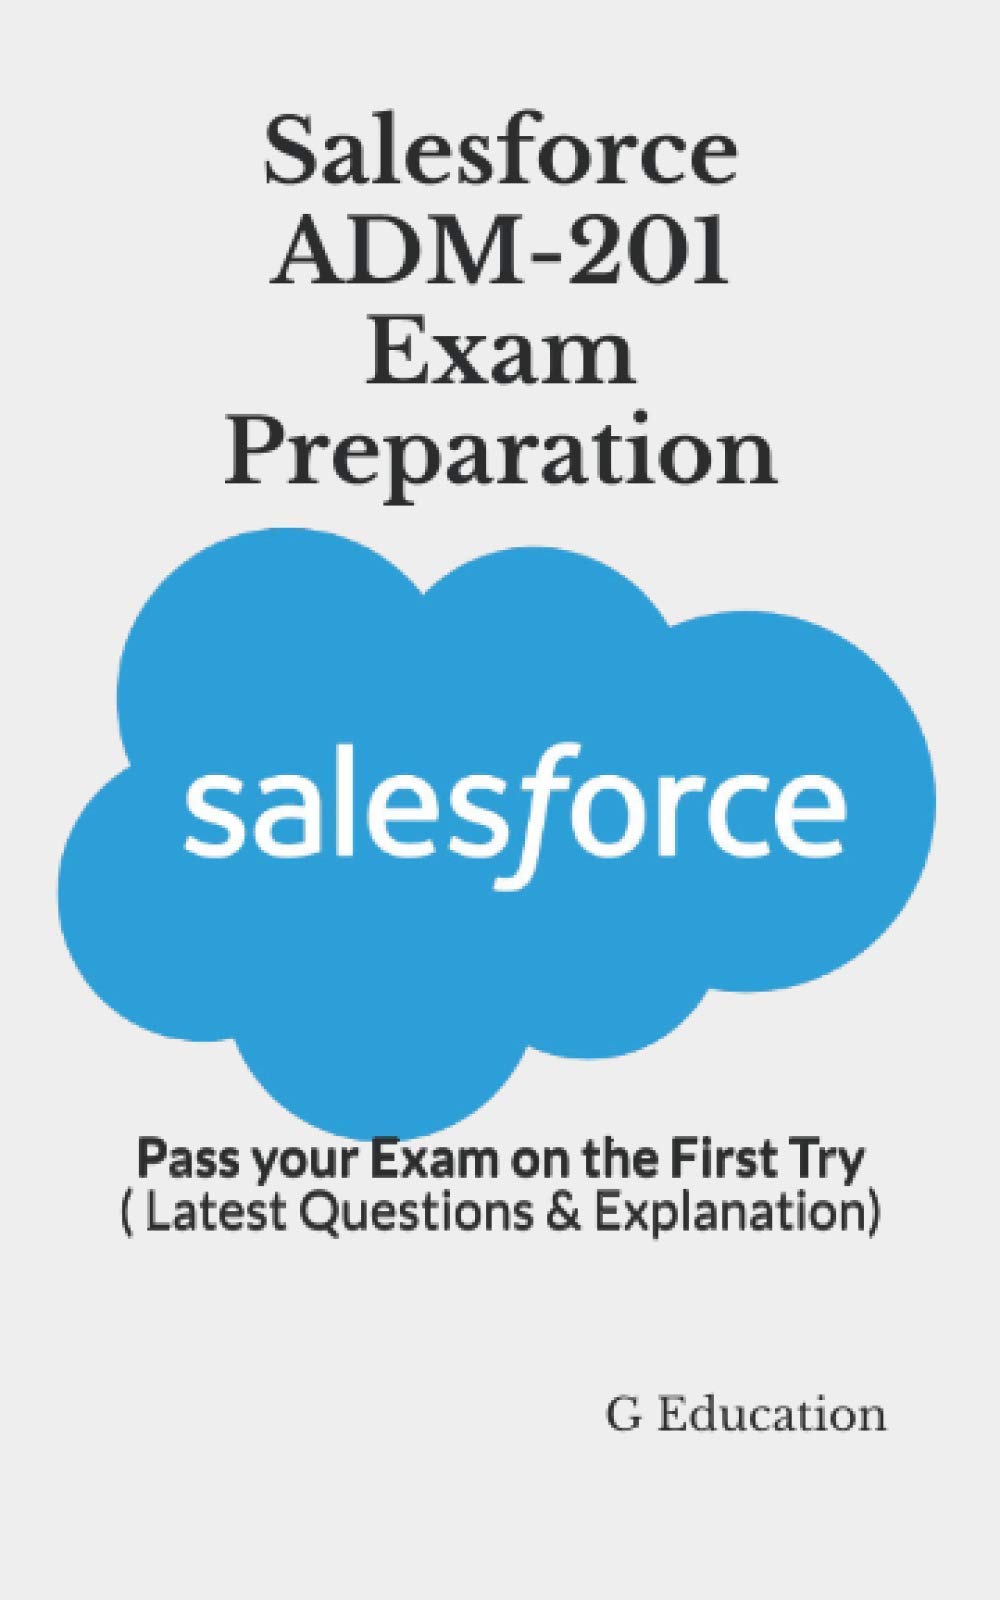 Salesforce ADM-201 Exam Preparation: Pass your Exam on the First Try ( Latest Questions & Explanation)